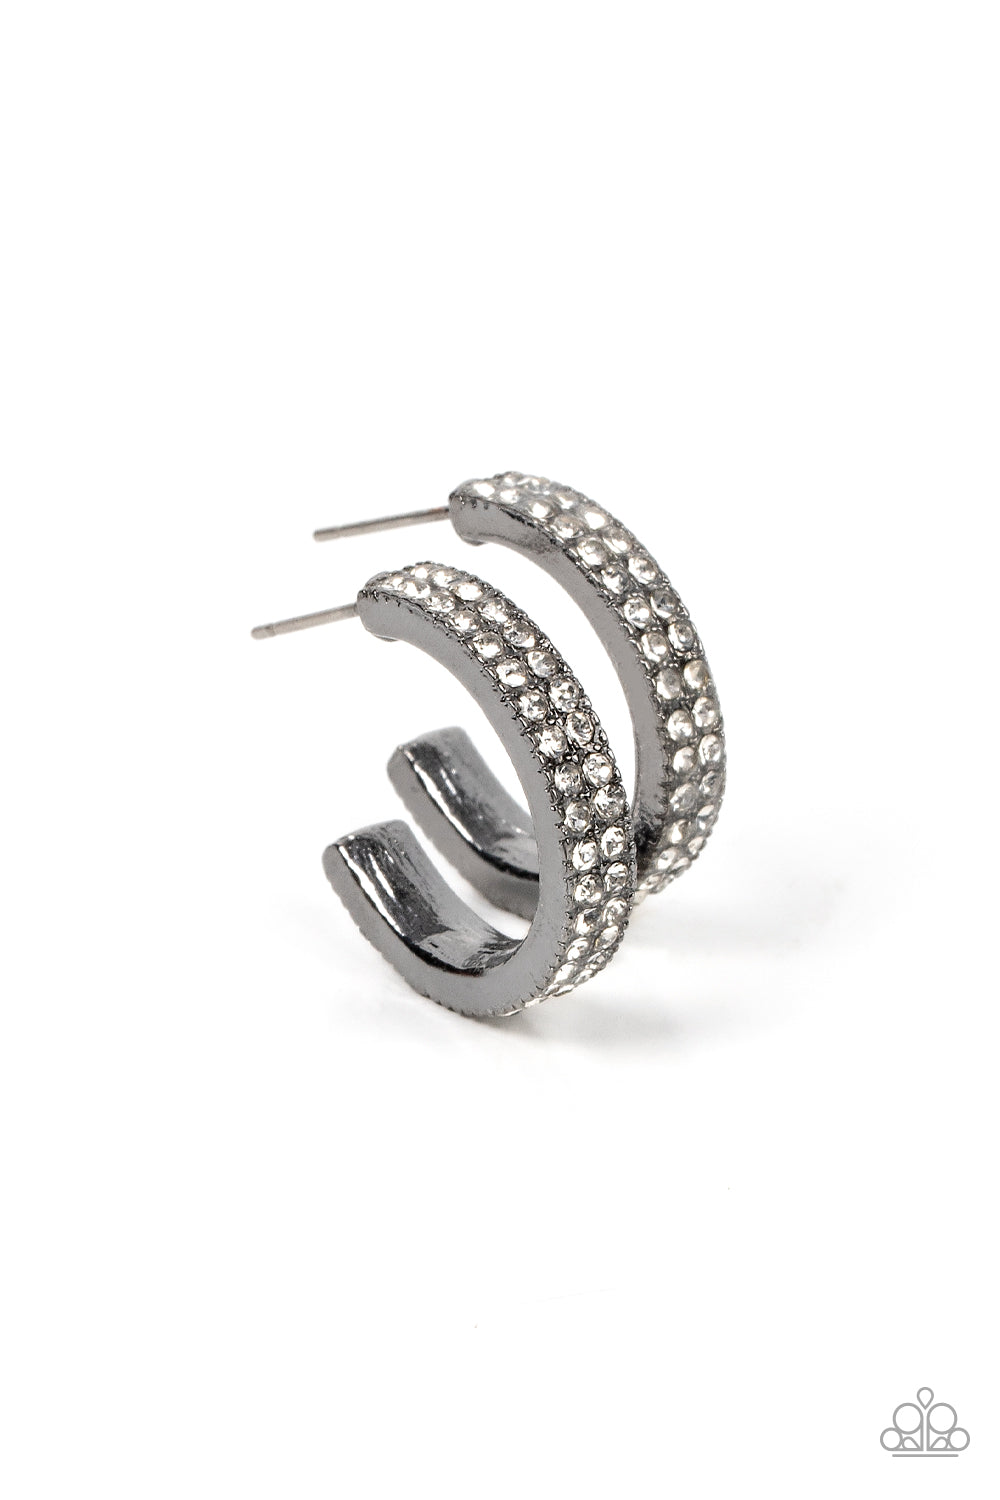 Small Town Twinkle Black Hoop Earring - Paparazzi Accessories  Two rows of glassy white rhinestones encrust the front of a dainty gunmetal hoop, resulting in a timeless twinkle. Earring attaches to a standard post fitting. Hoop measures approximately 3/4" in diameter.  Sold as one pair of hoop earrings.